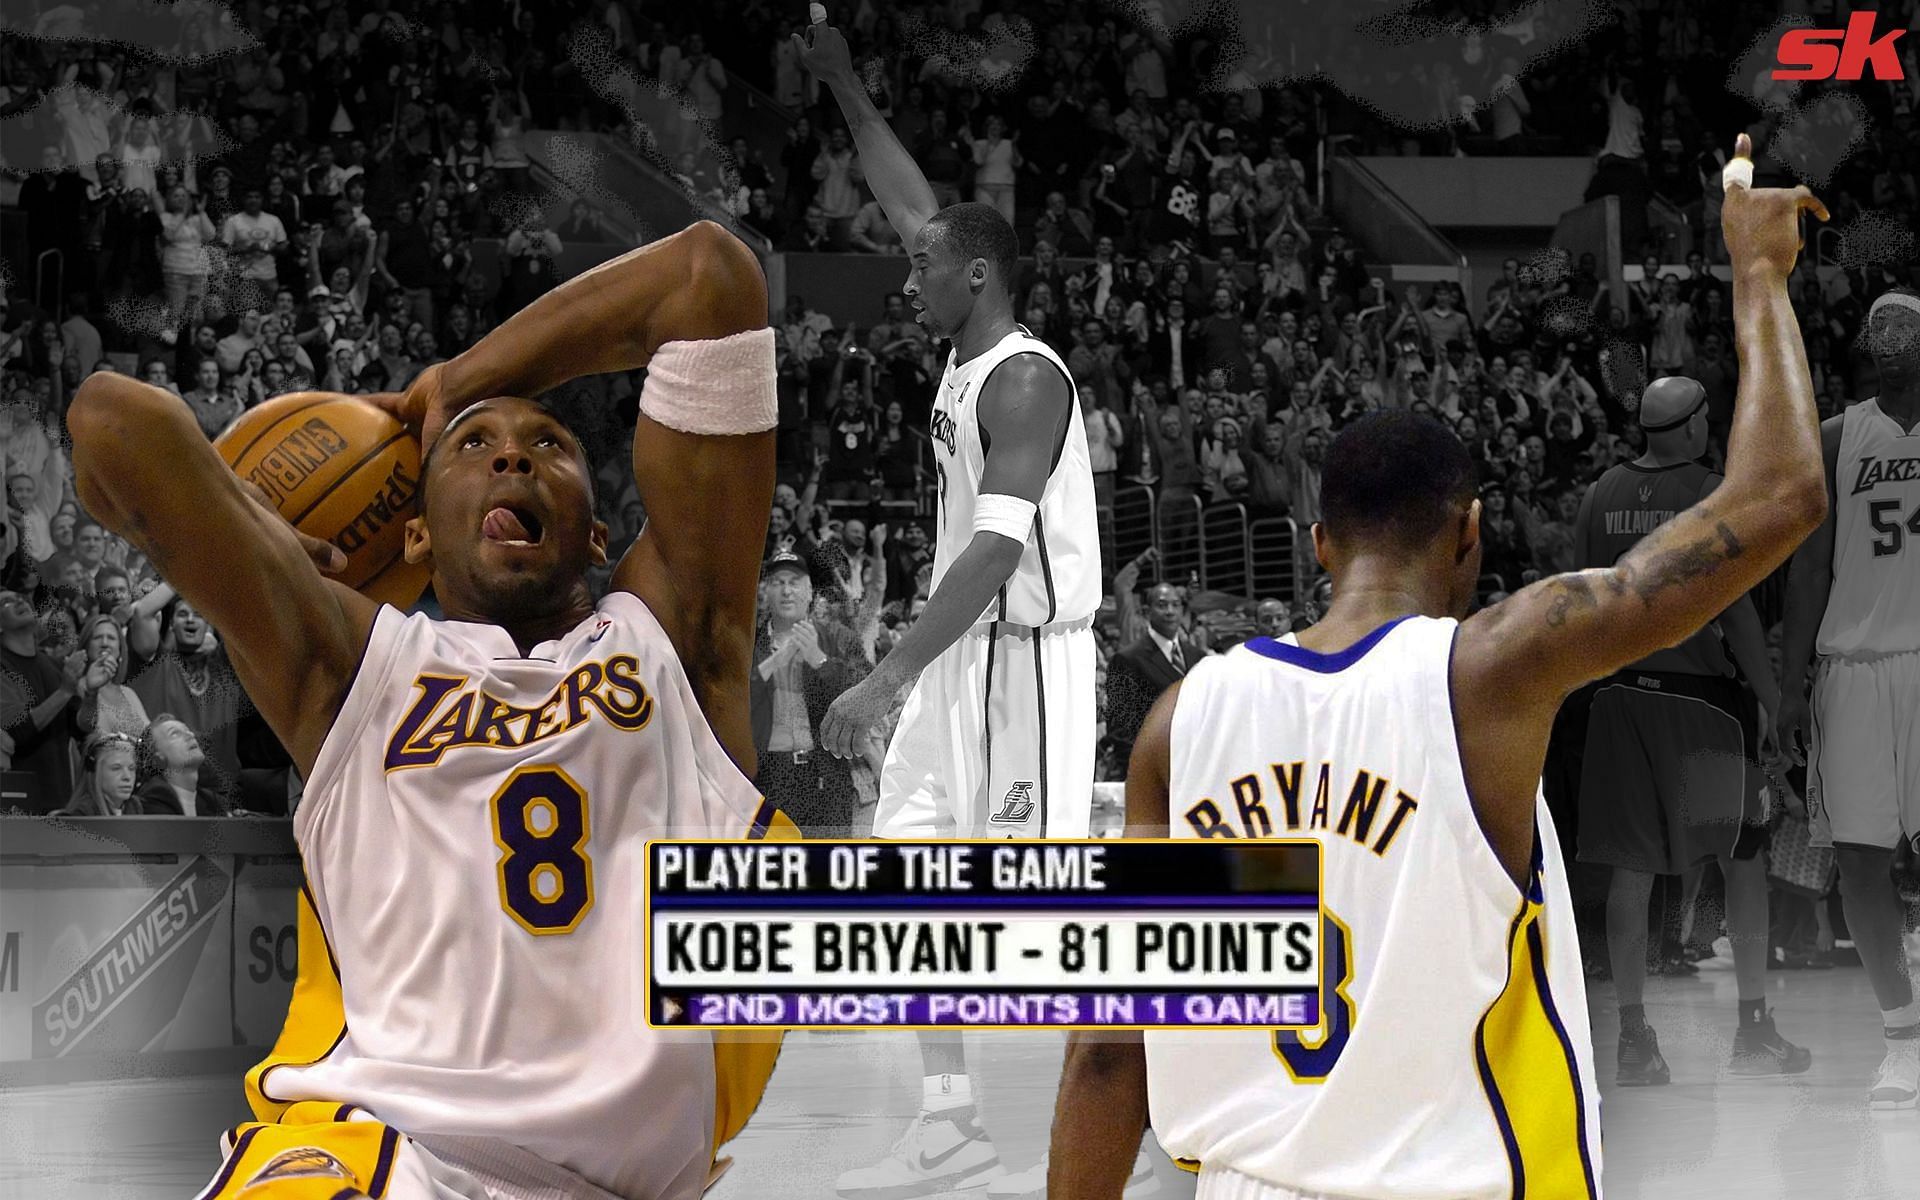 Kobe Bryant's 81-point game was only a part of Lakers legend's